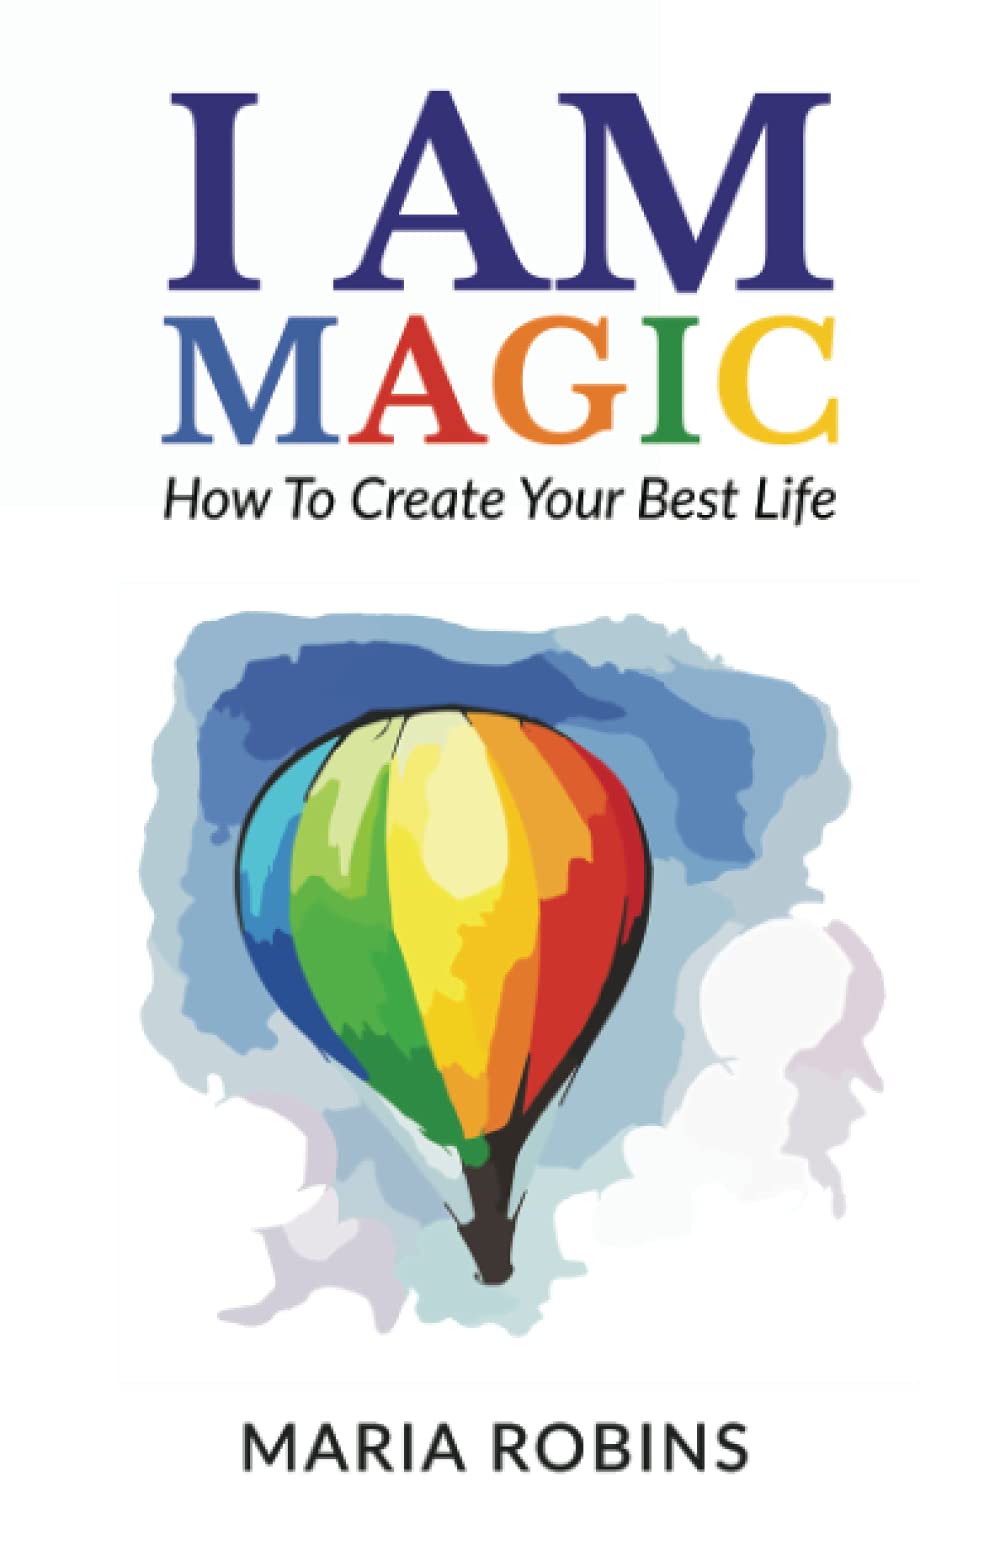 I AM Magic: How To Create Your Best Life - CA Corrections Bookstore